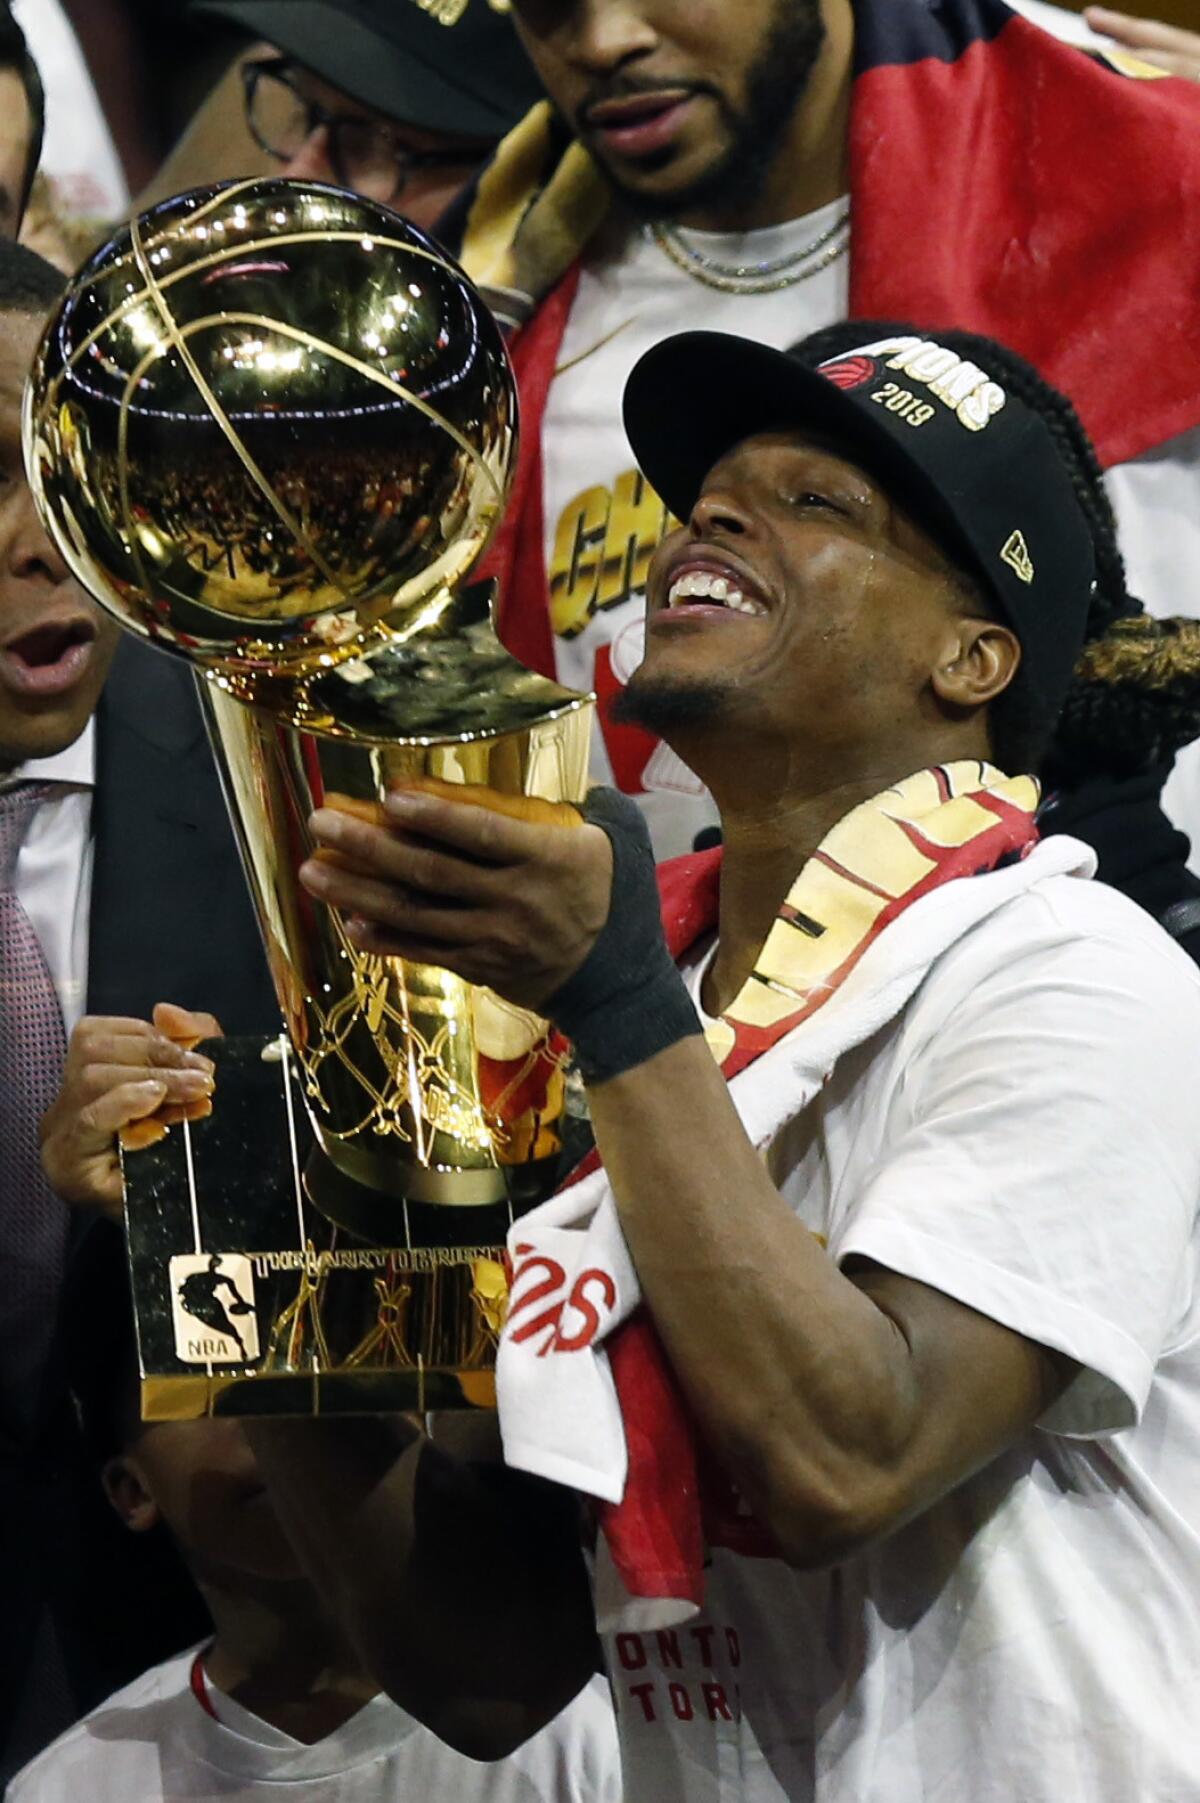 Kyle Lowry #7of the Toronto Raptors celebrates with the Larry O'Brien Championship Trophy after his team defeated the Golden State Warriors.